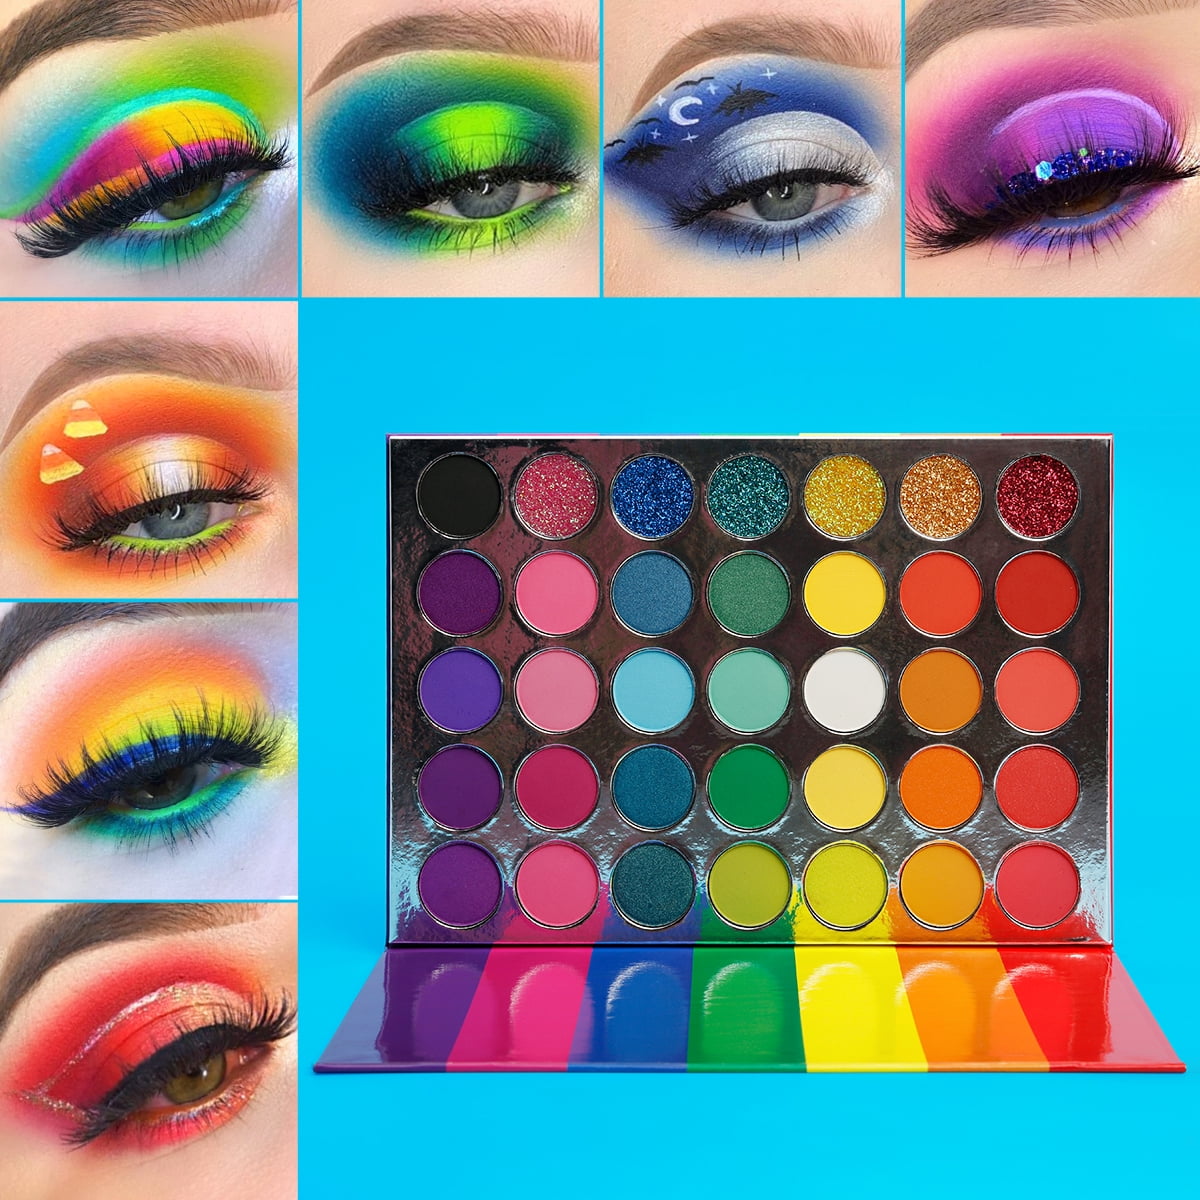 Rainbow Eyeshadow Palette Colorful Highly Pigmented 35 Colors, Long Lasting Matte Shimmer Glitter Eye Shadow Pallet,Pink Red Orange Green Blue Purple Bright Makeup for Christmas - Walmart.com